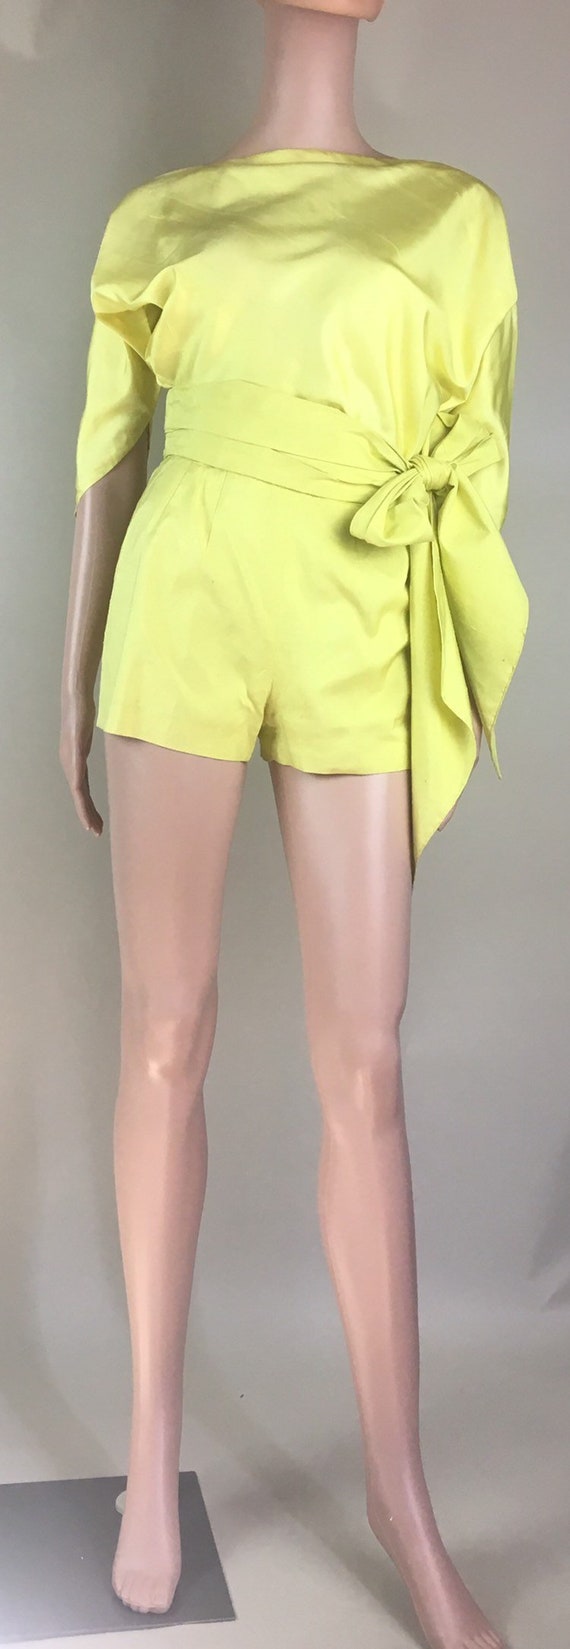 Vintage 1960s Pure Silk Two Piece Top and Shorts by Emillio Pucci Made in Italy